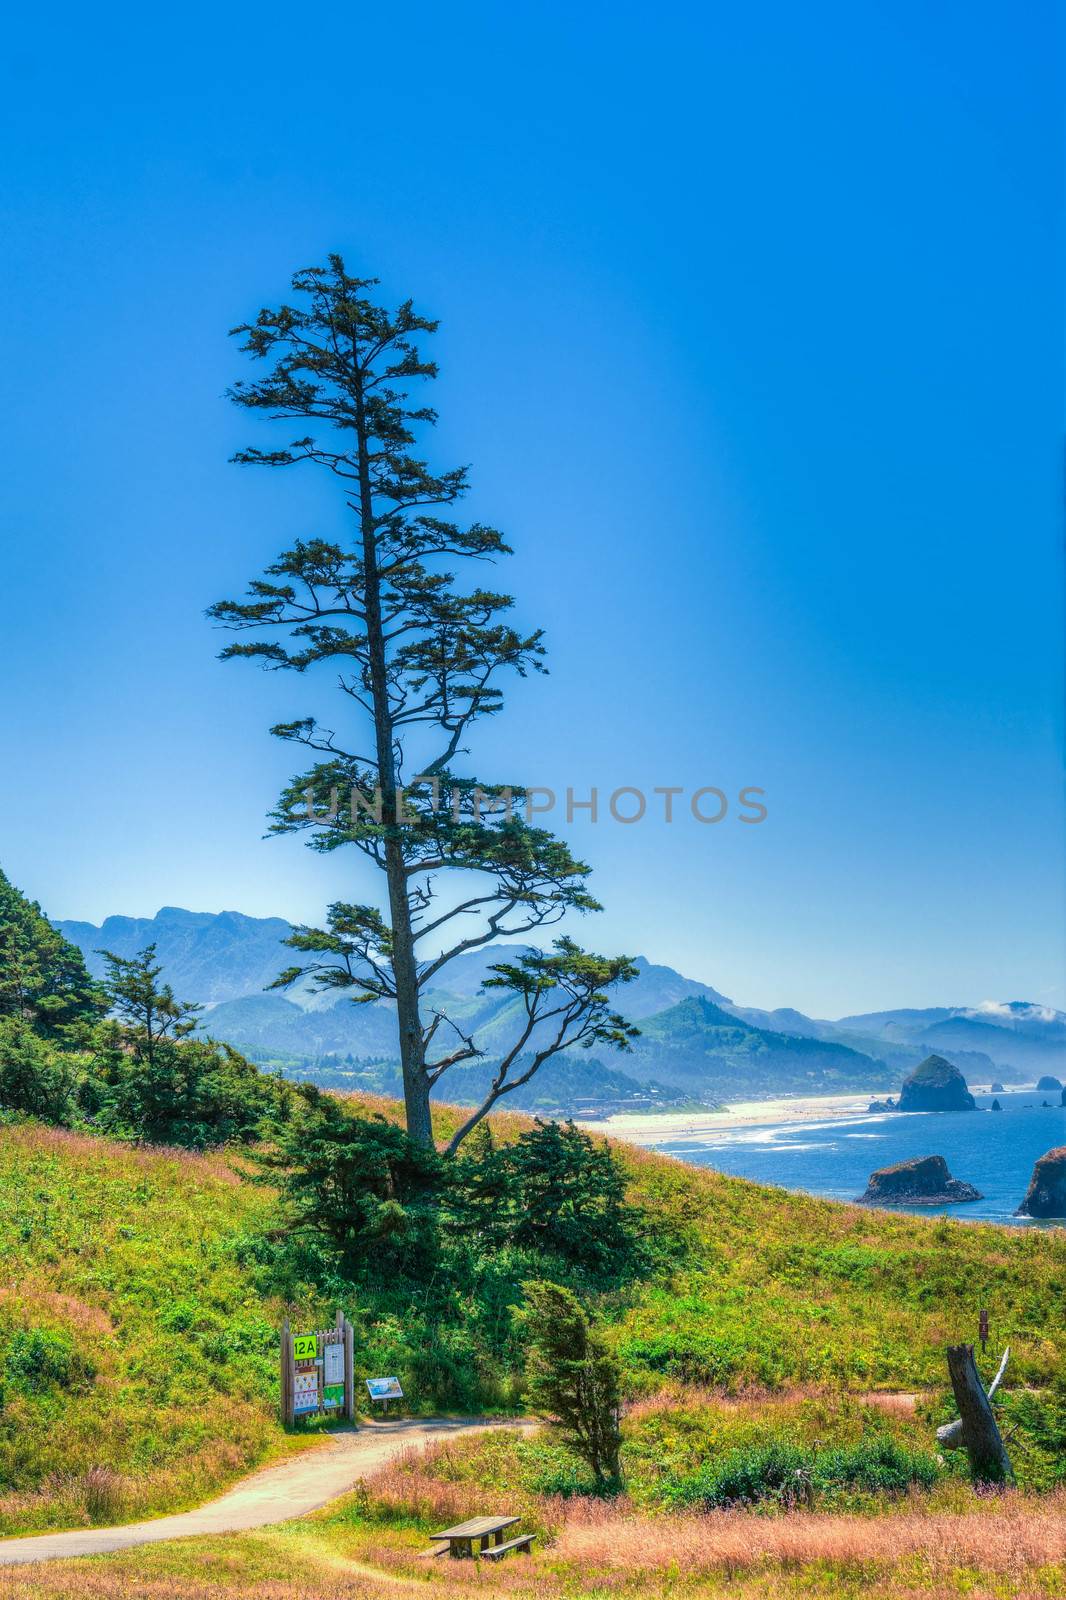 State Park overlooking Cannon Beach, Oregon